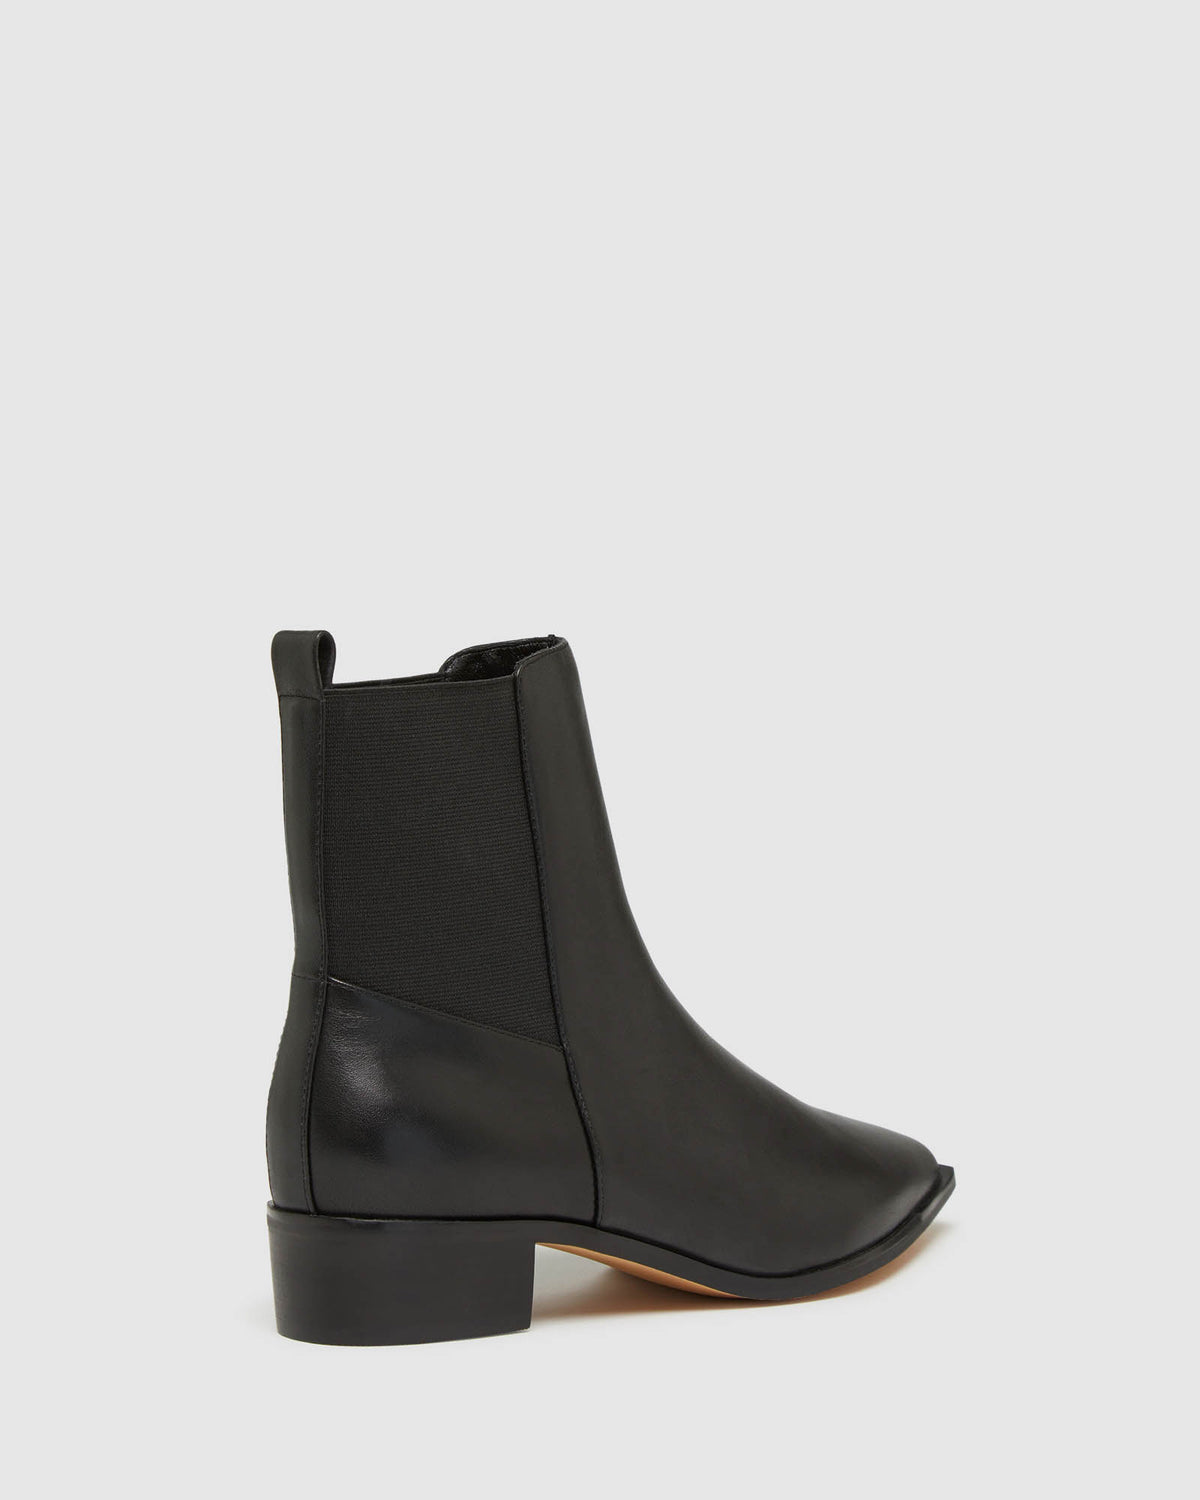 JUNIPER ANKLE BOOTS